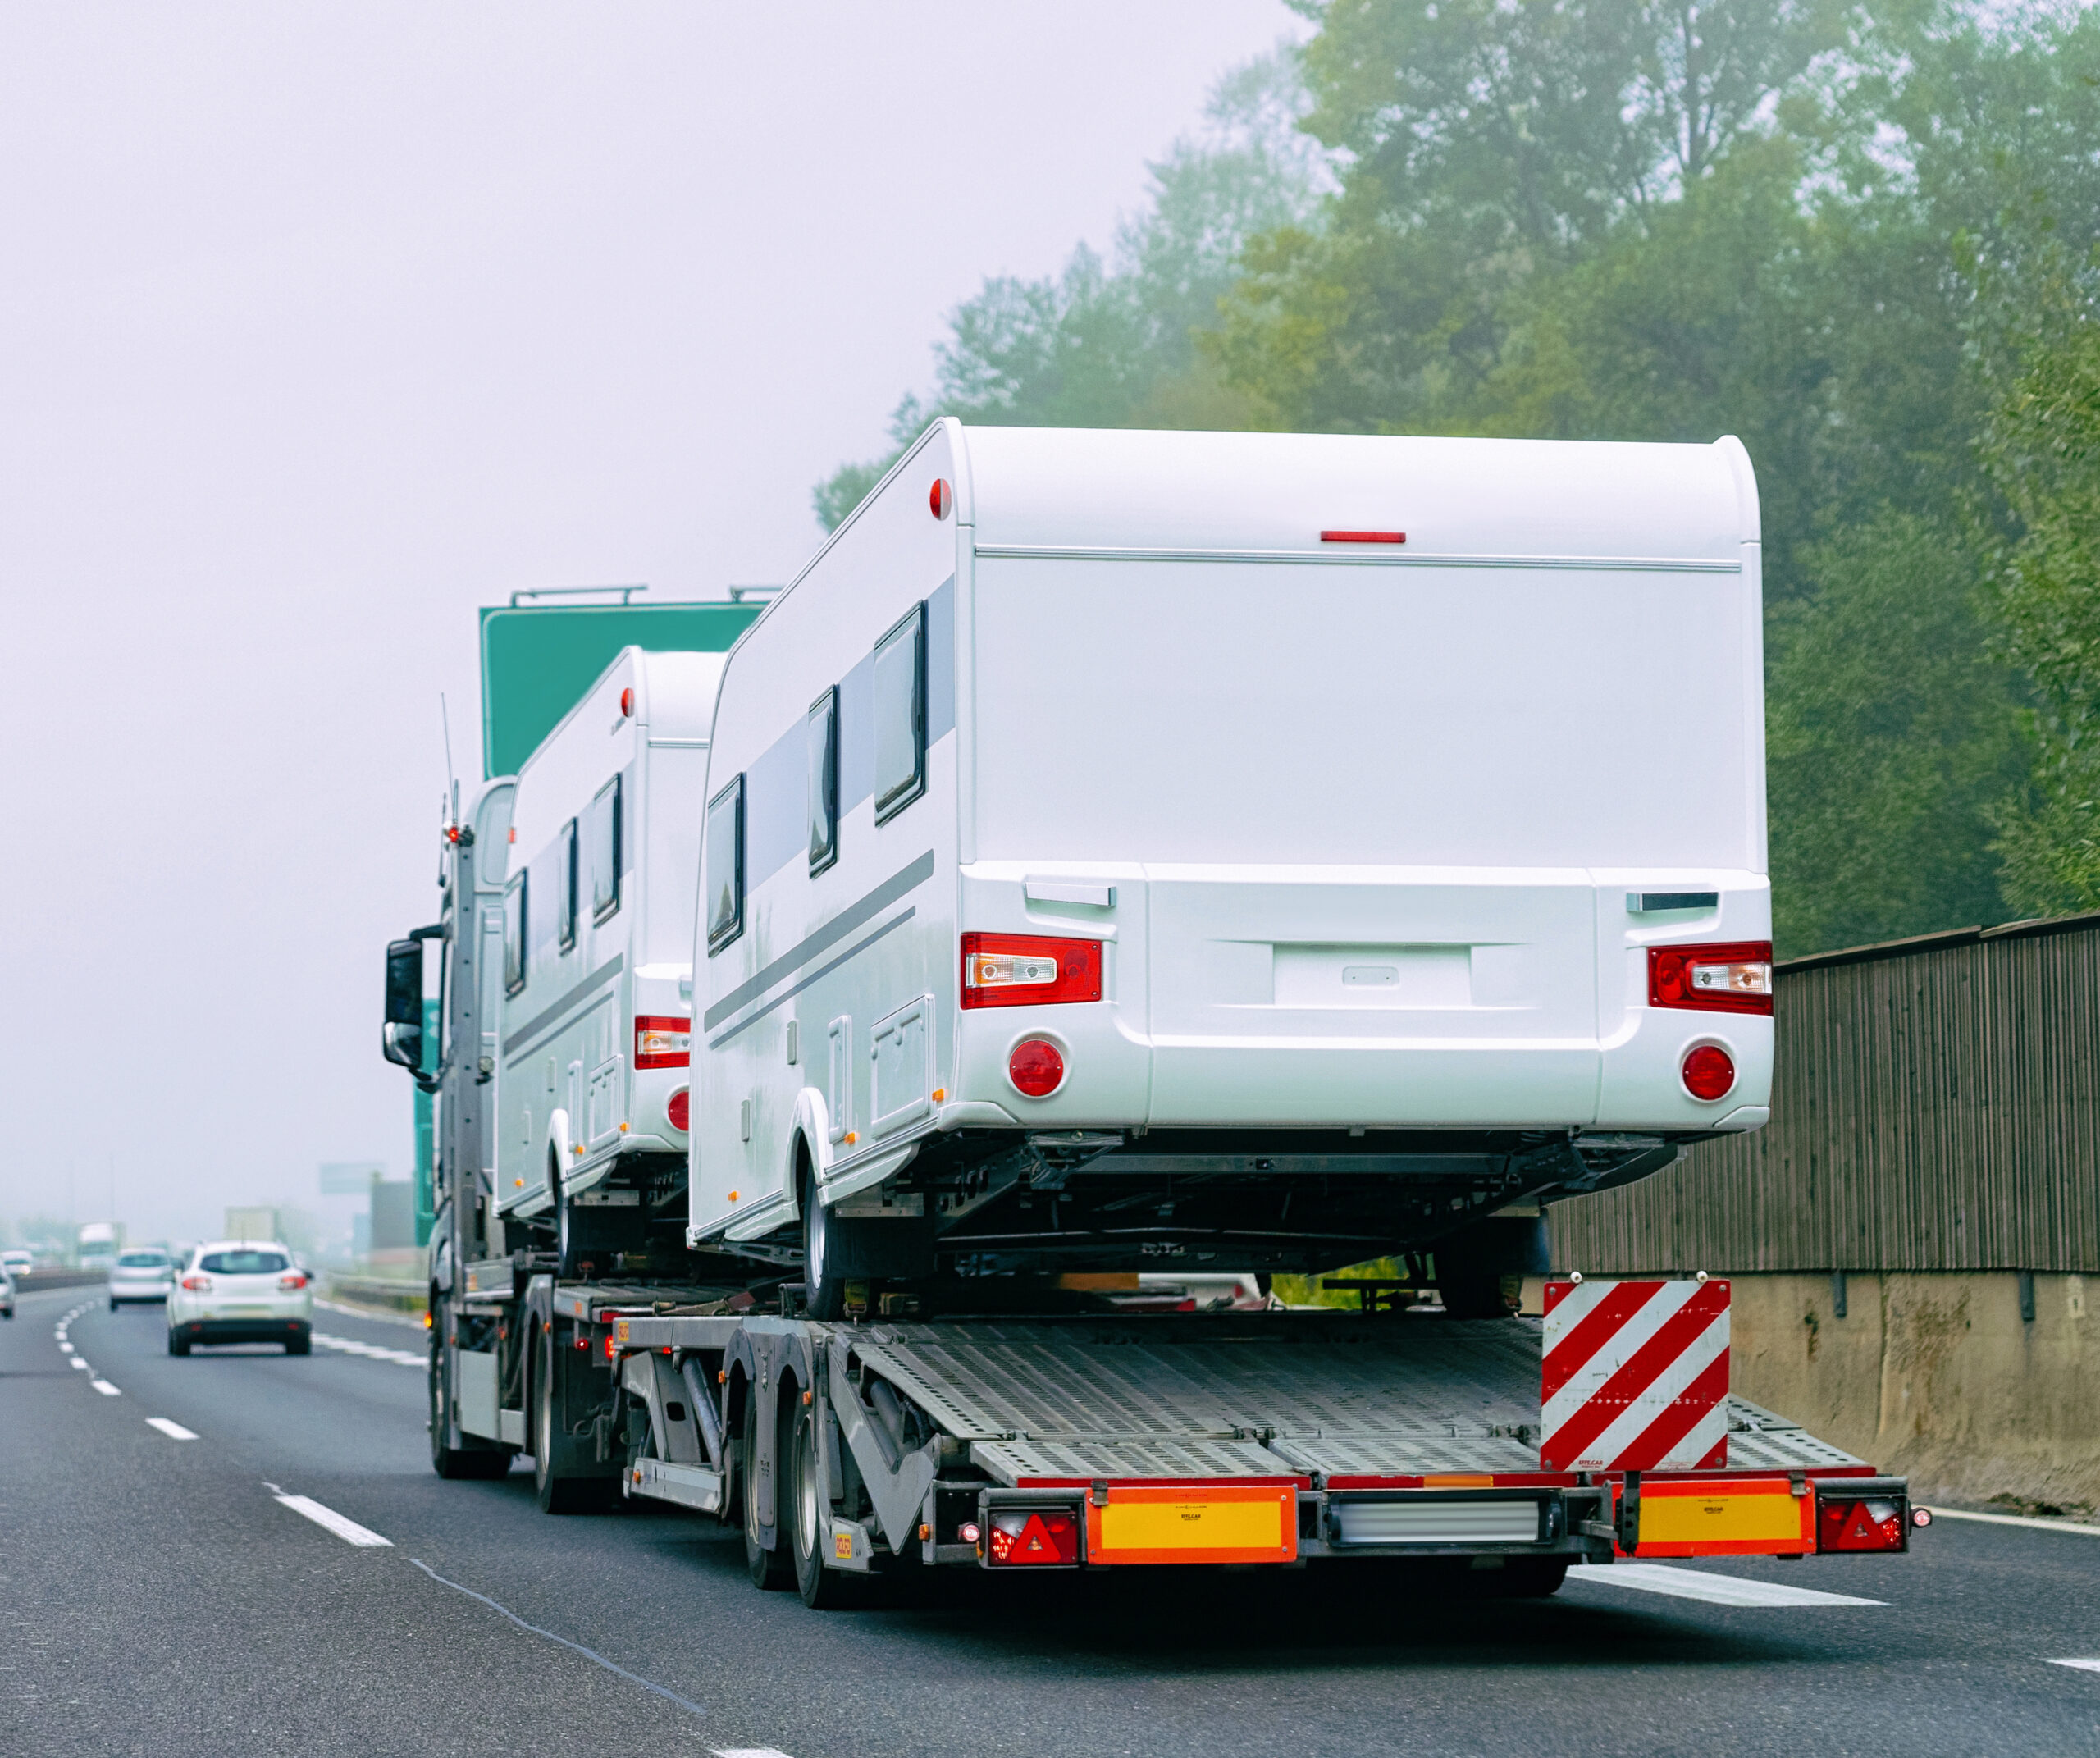 Truck transporting RVs on the highway